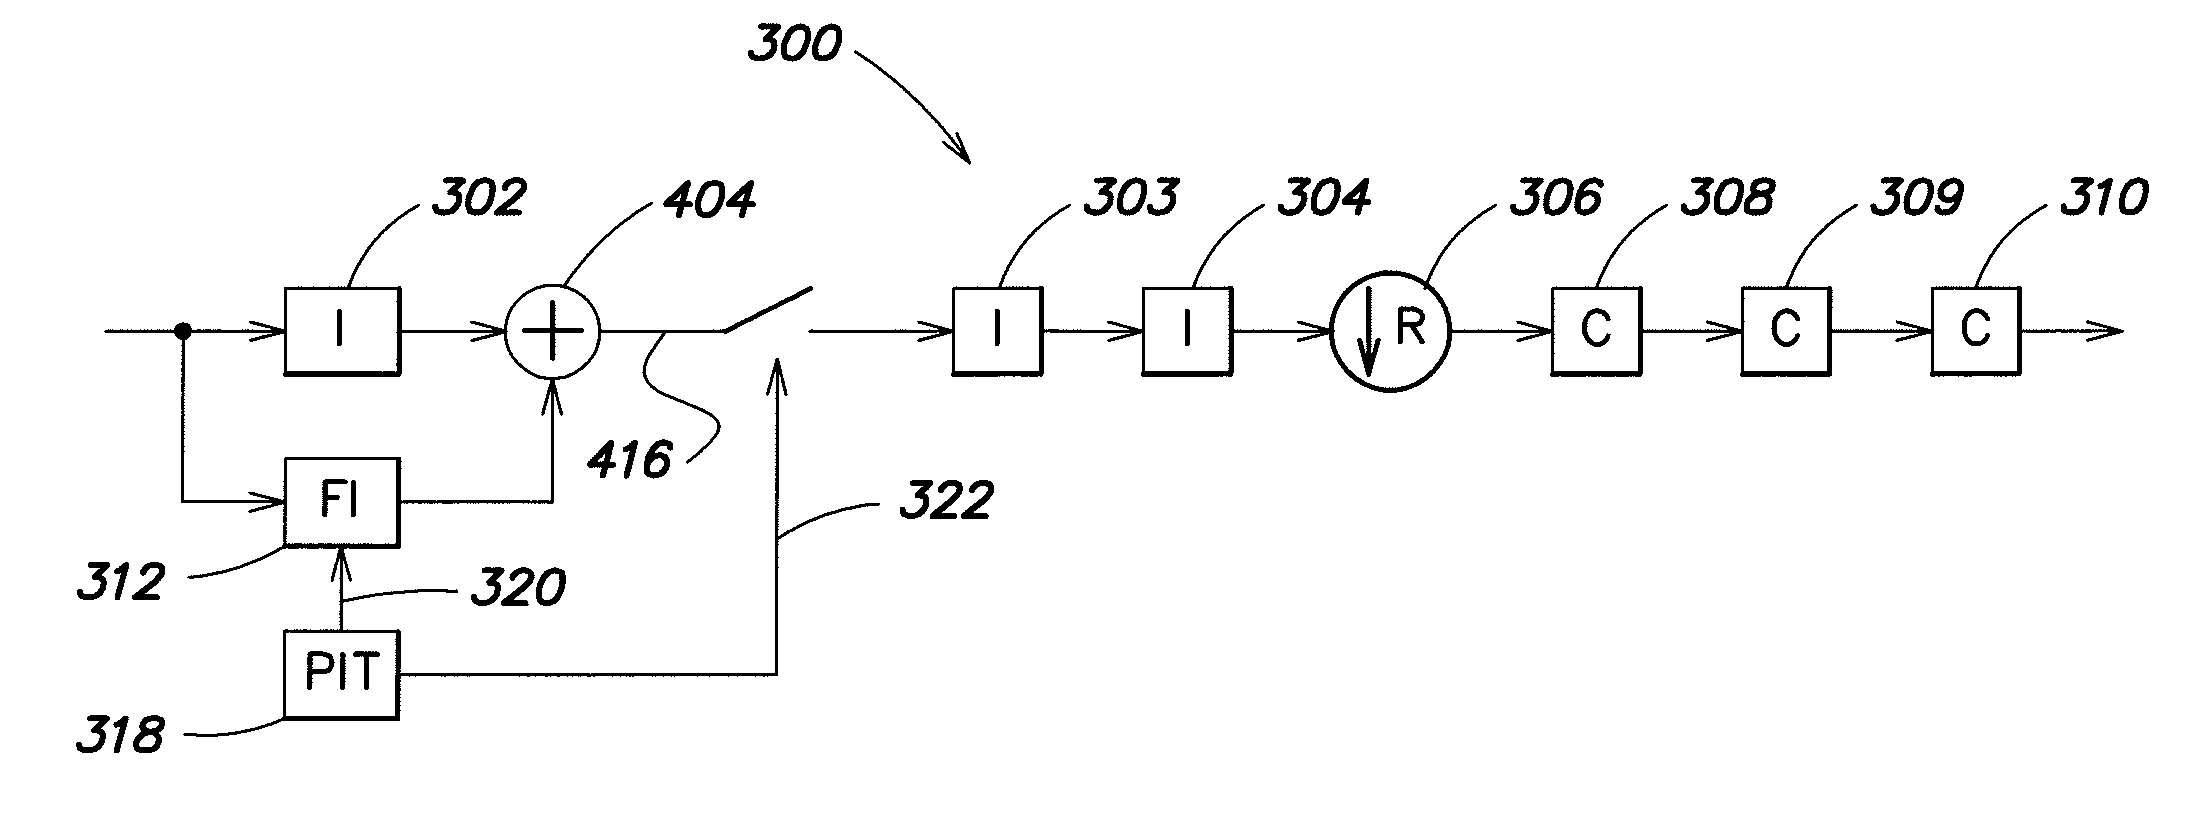 Cascaded integrated comb filter with fractional integration